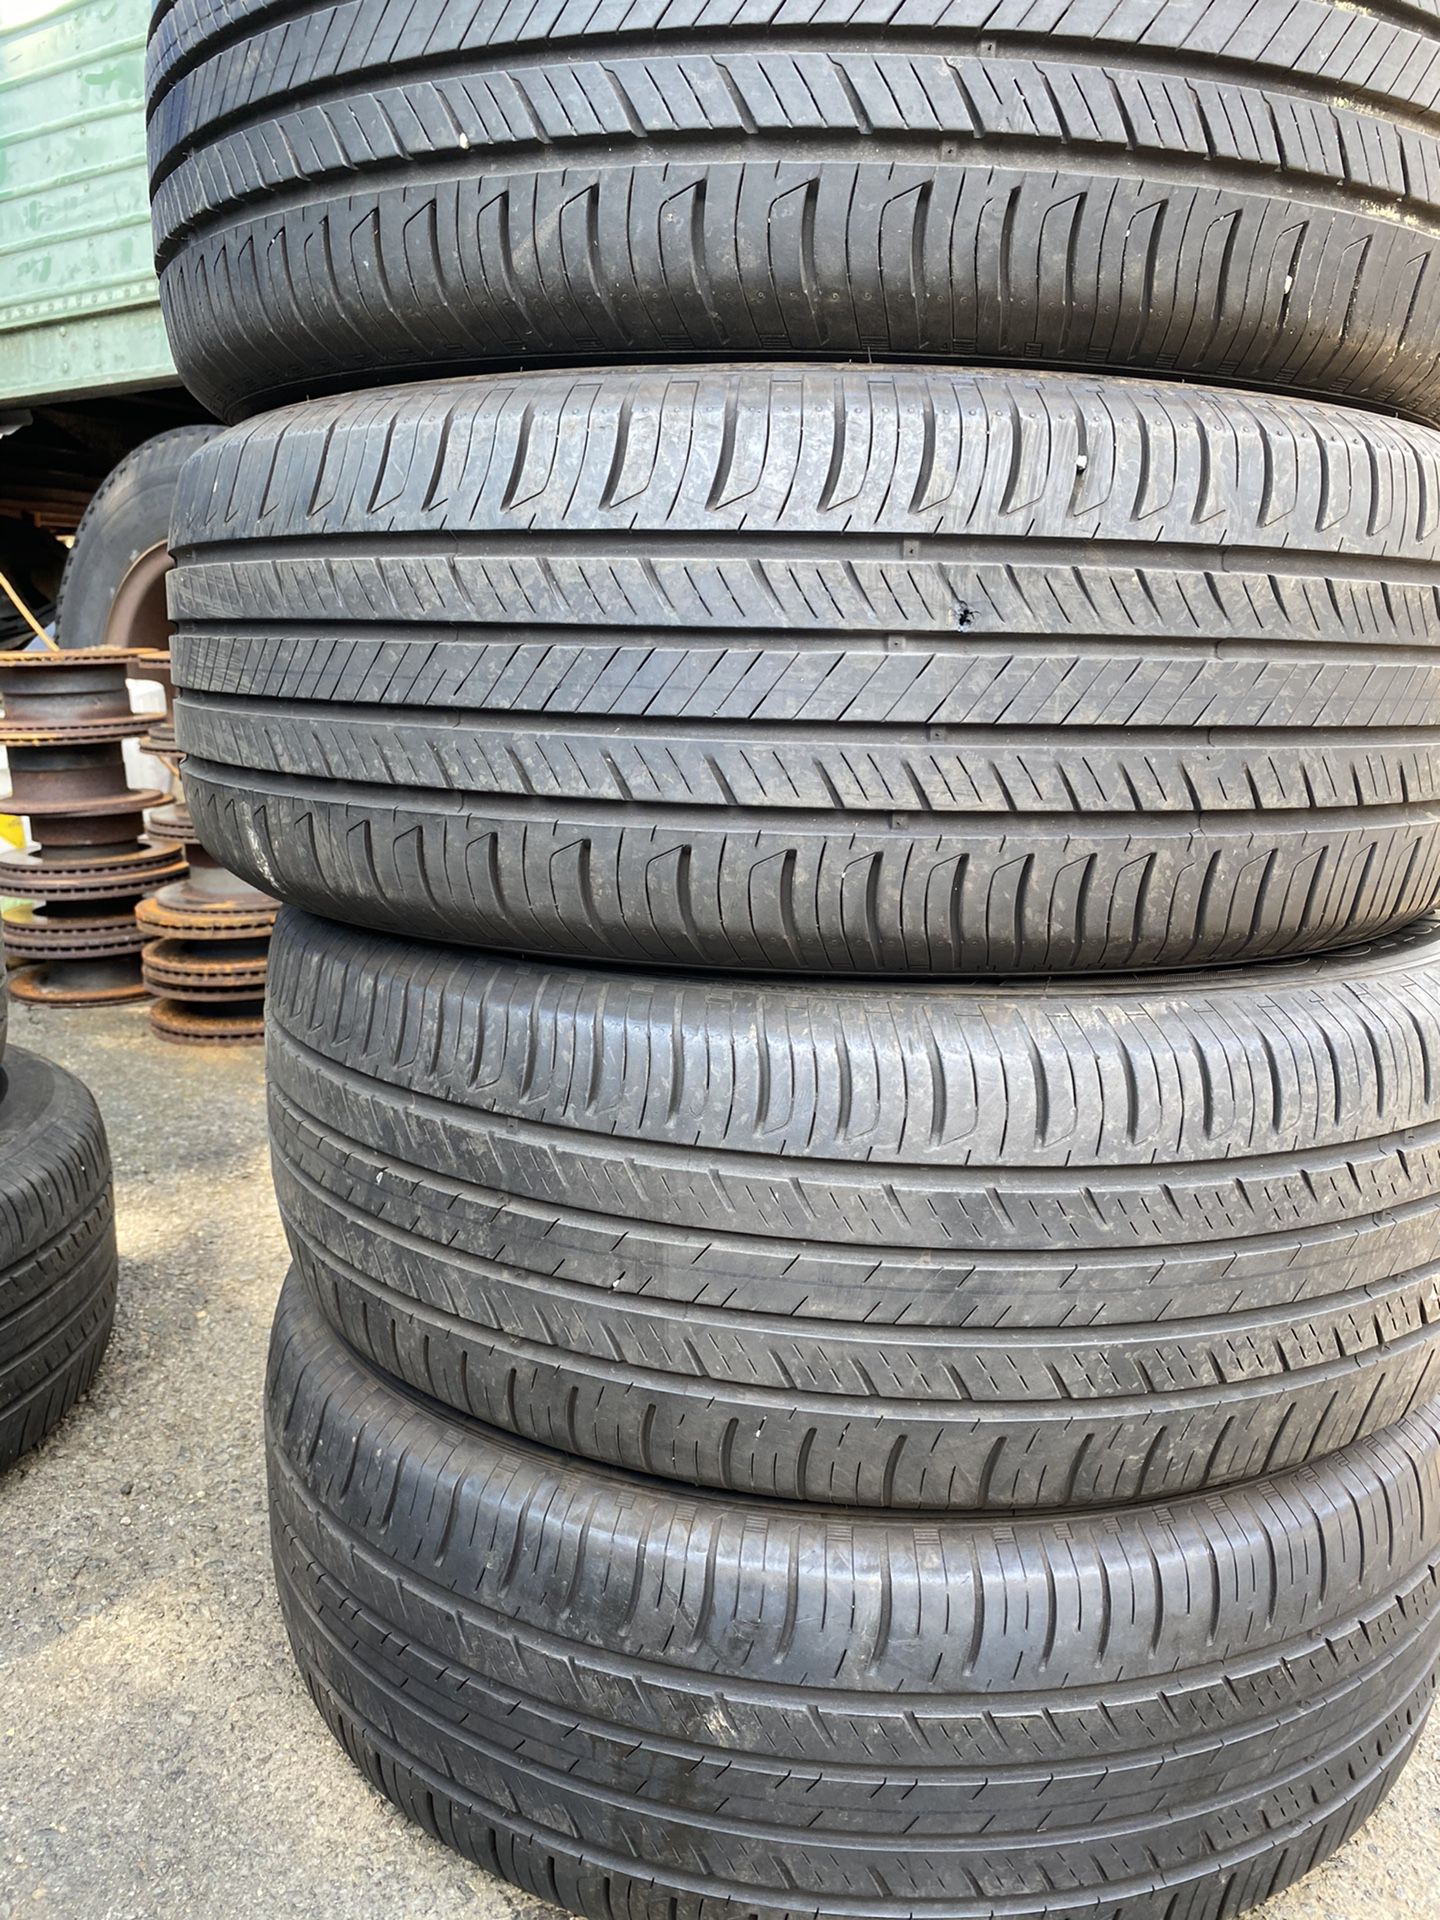 Set 4 usted tire 235/60R18 HANKOOK one have two patch set 4 used tire $200